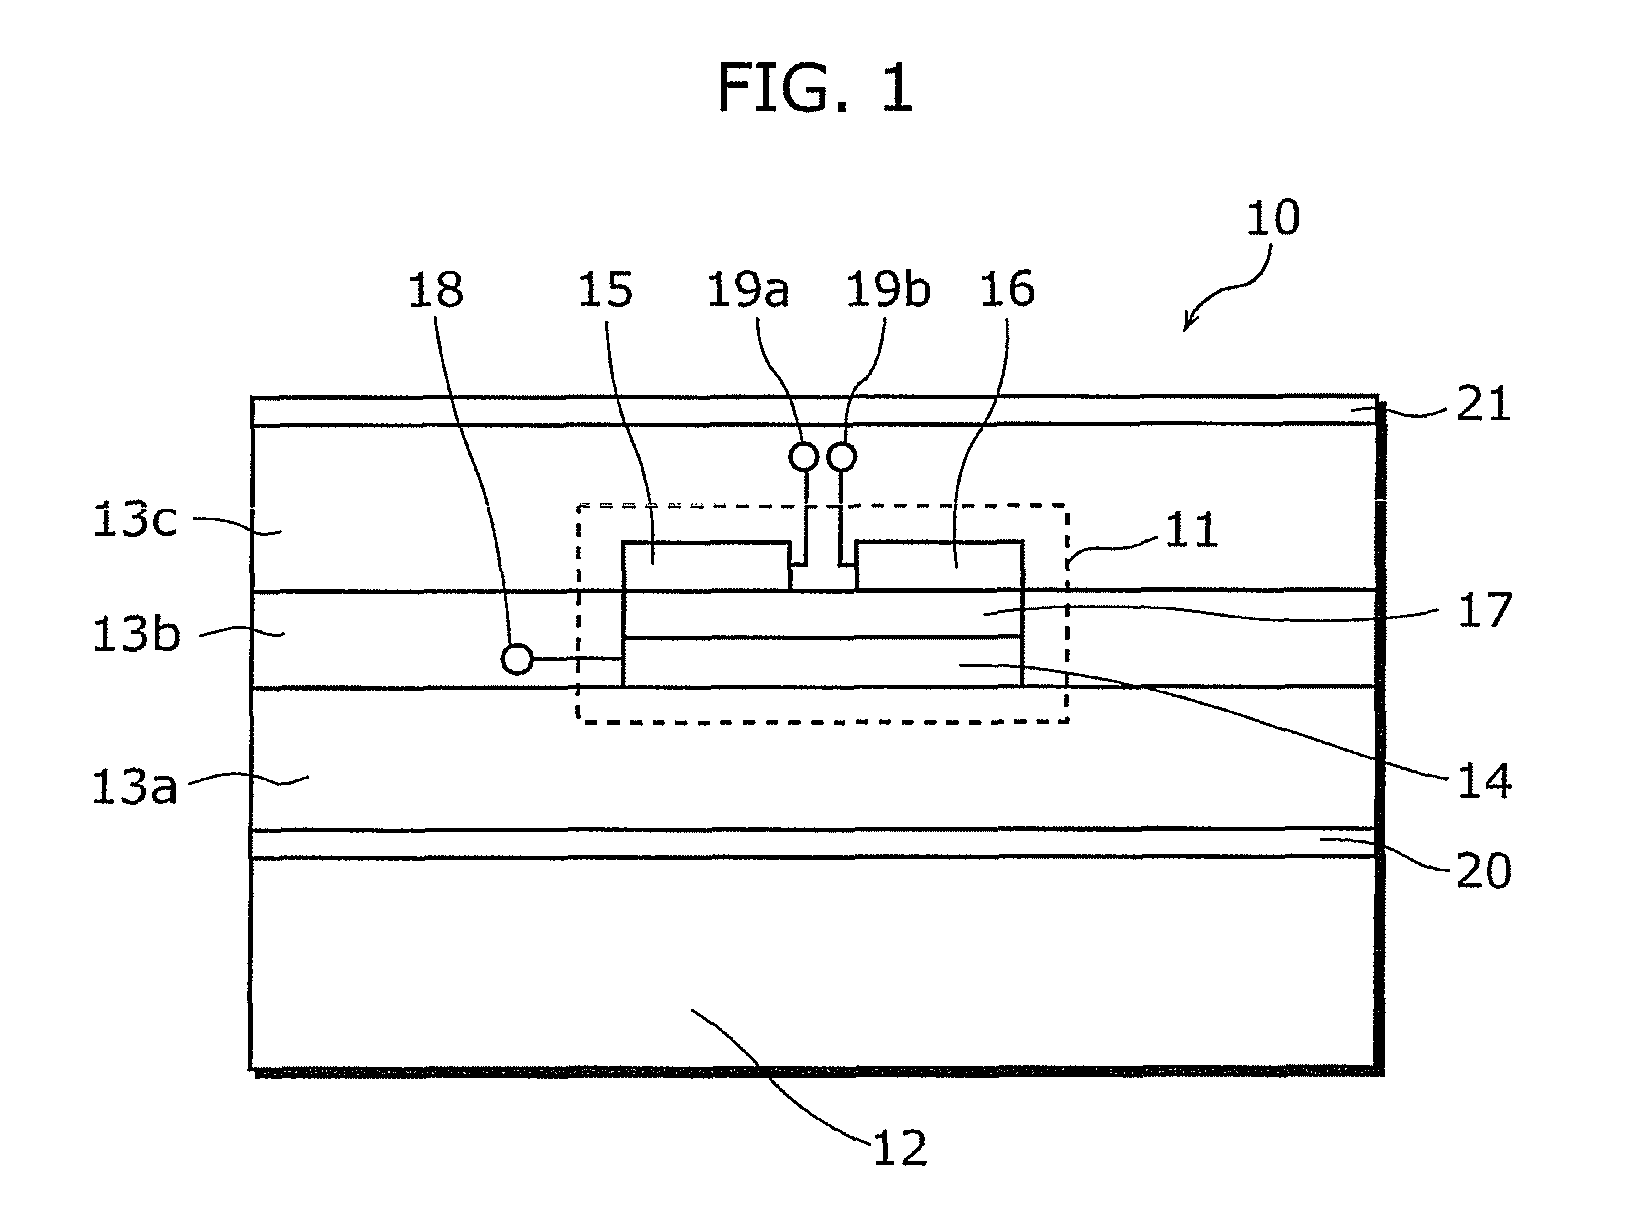 Semiconductor device with a balun